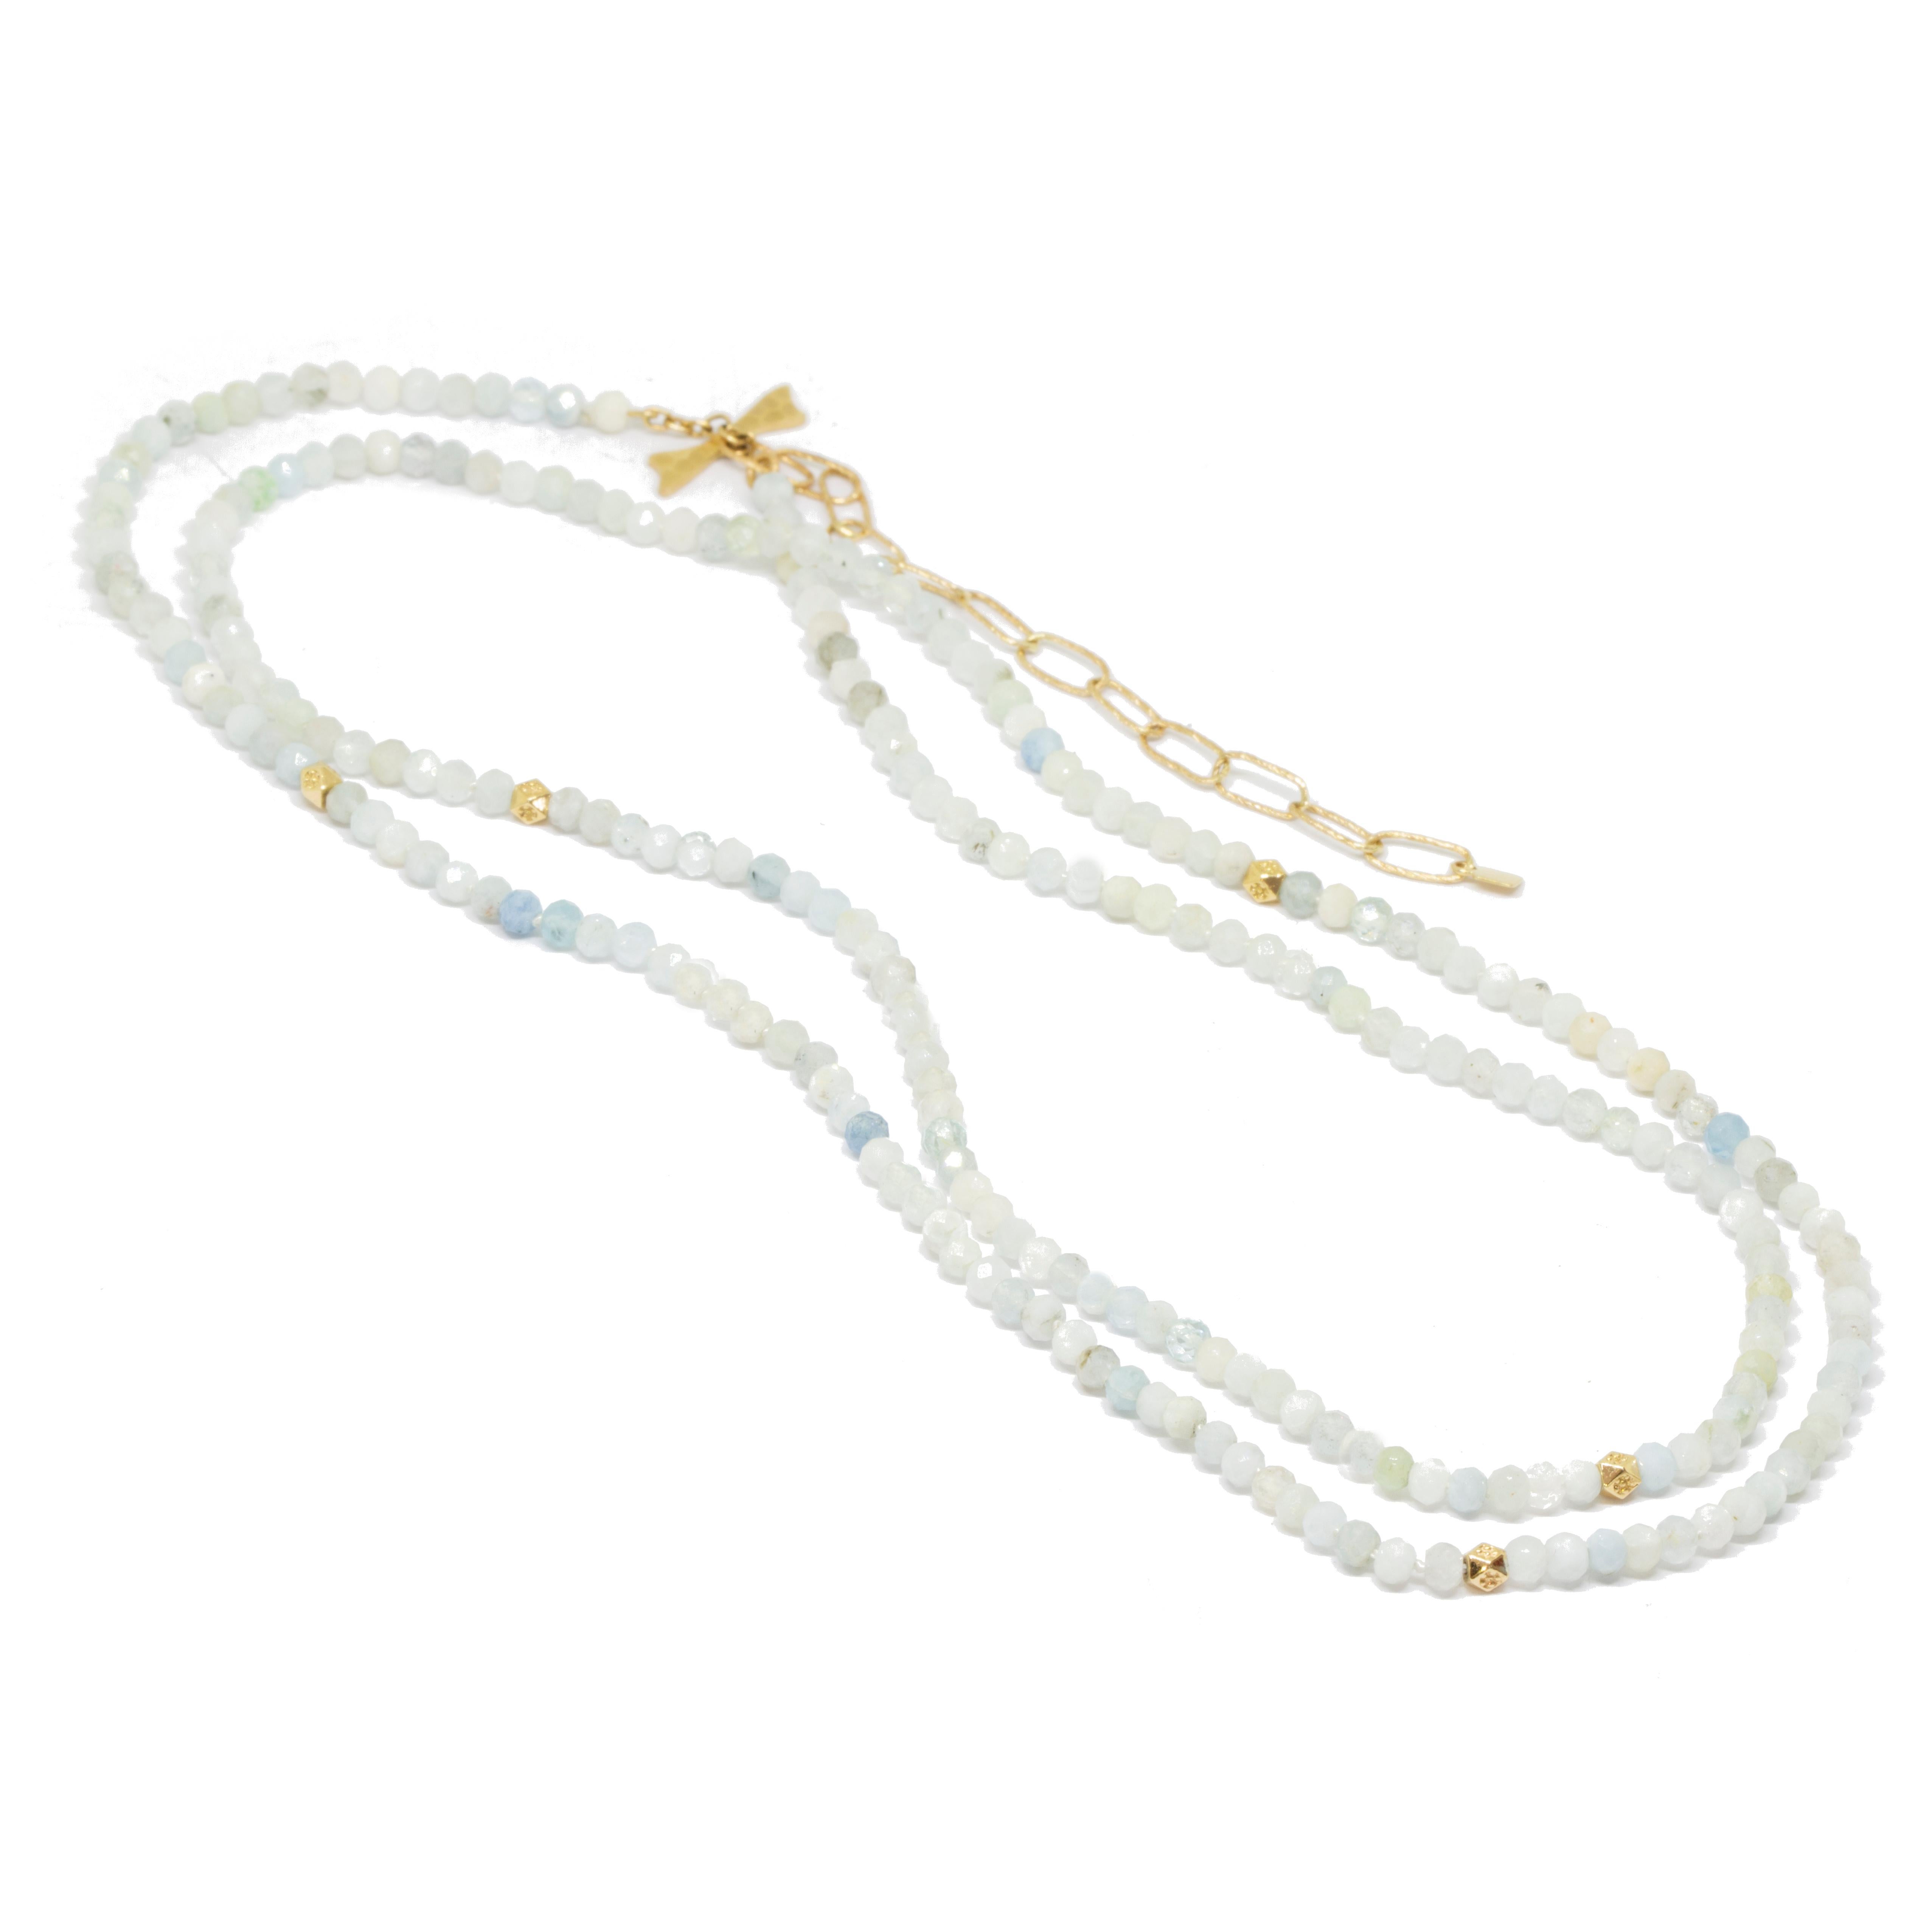 The best part about our Chloe Gold Gemstone Convertable Wrap isn’t just that it can be worn long, doubled-up, or as a wrap bracelet (although that’s pretty cool). It’s that you can thread any of our Charms onto the aquamarine beads—have fun playing